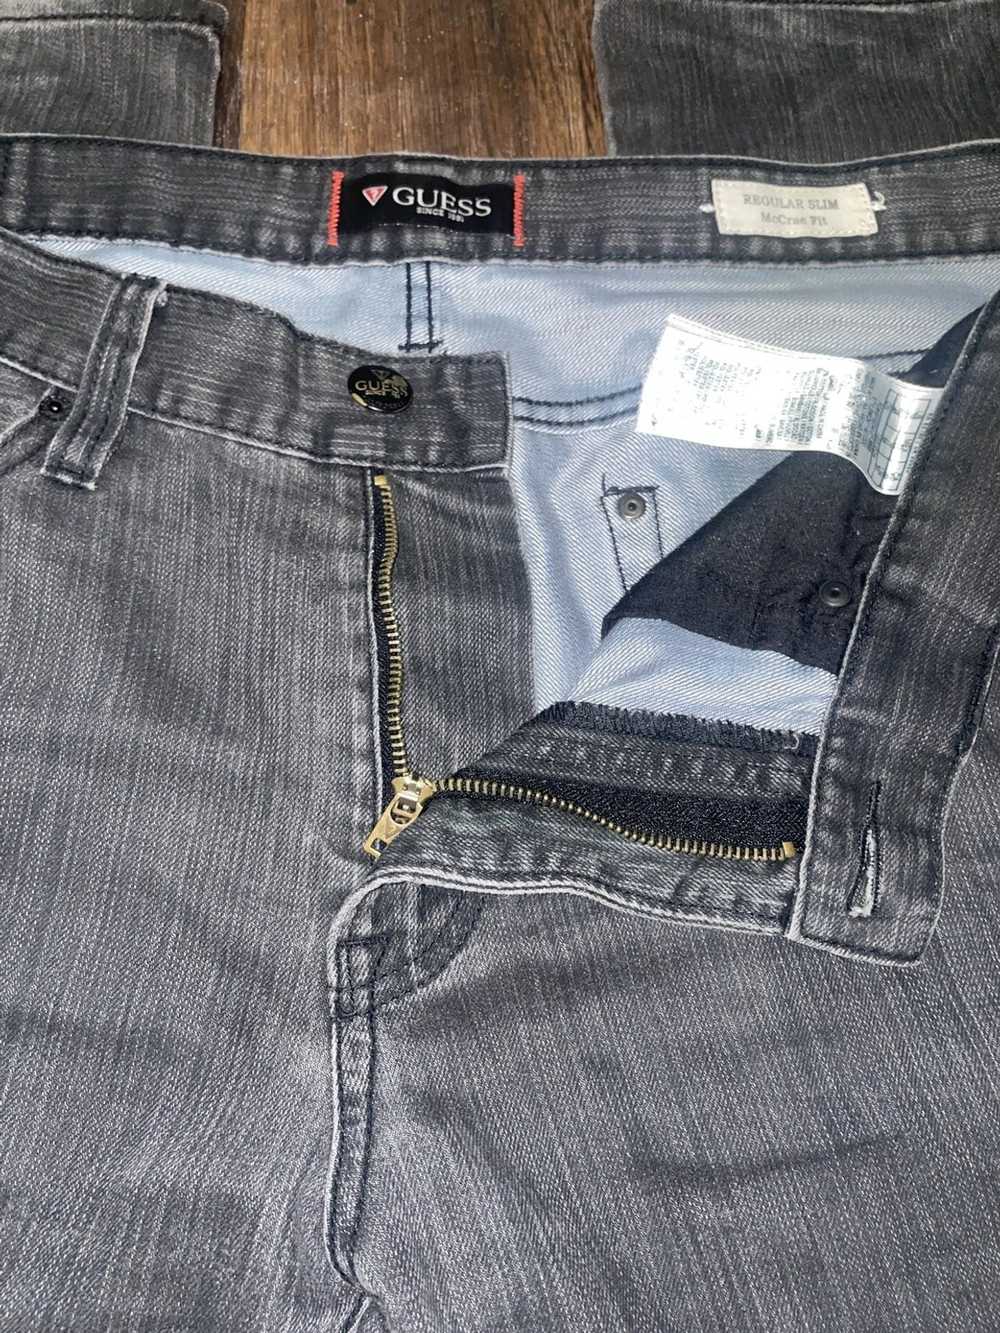 Guess Vintage GUESS jeans - image 3